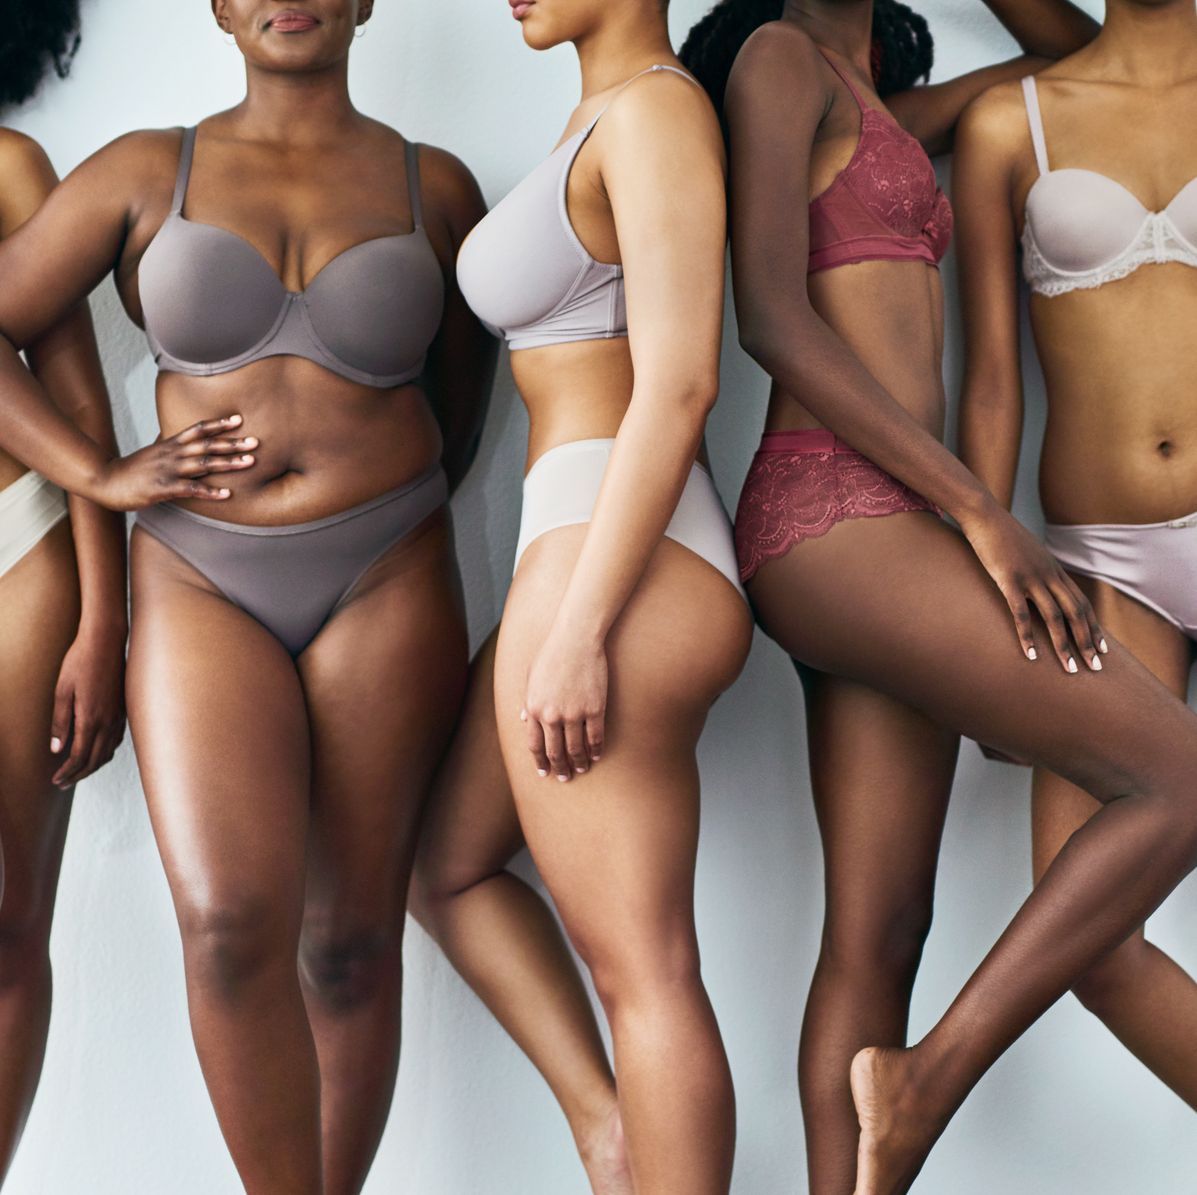 This is what the perfect cleavage looks like, according to Wonderbra.